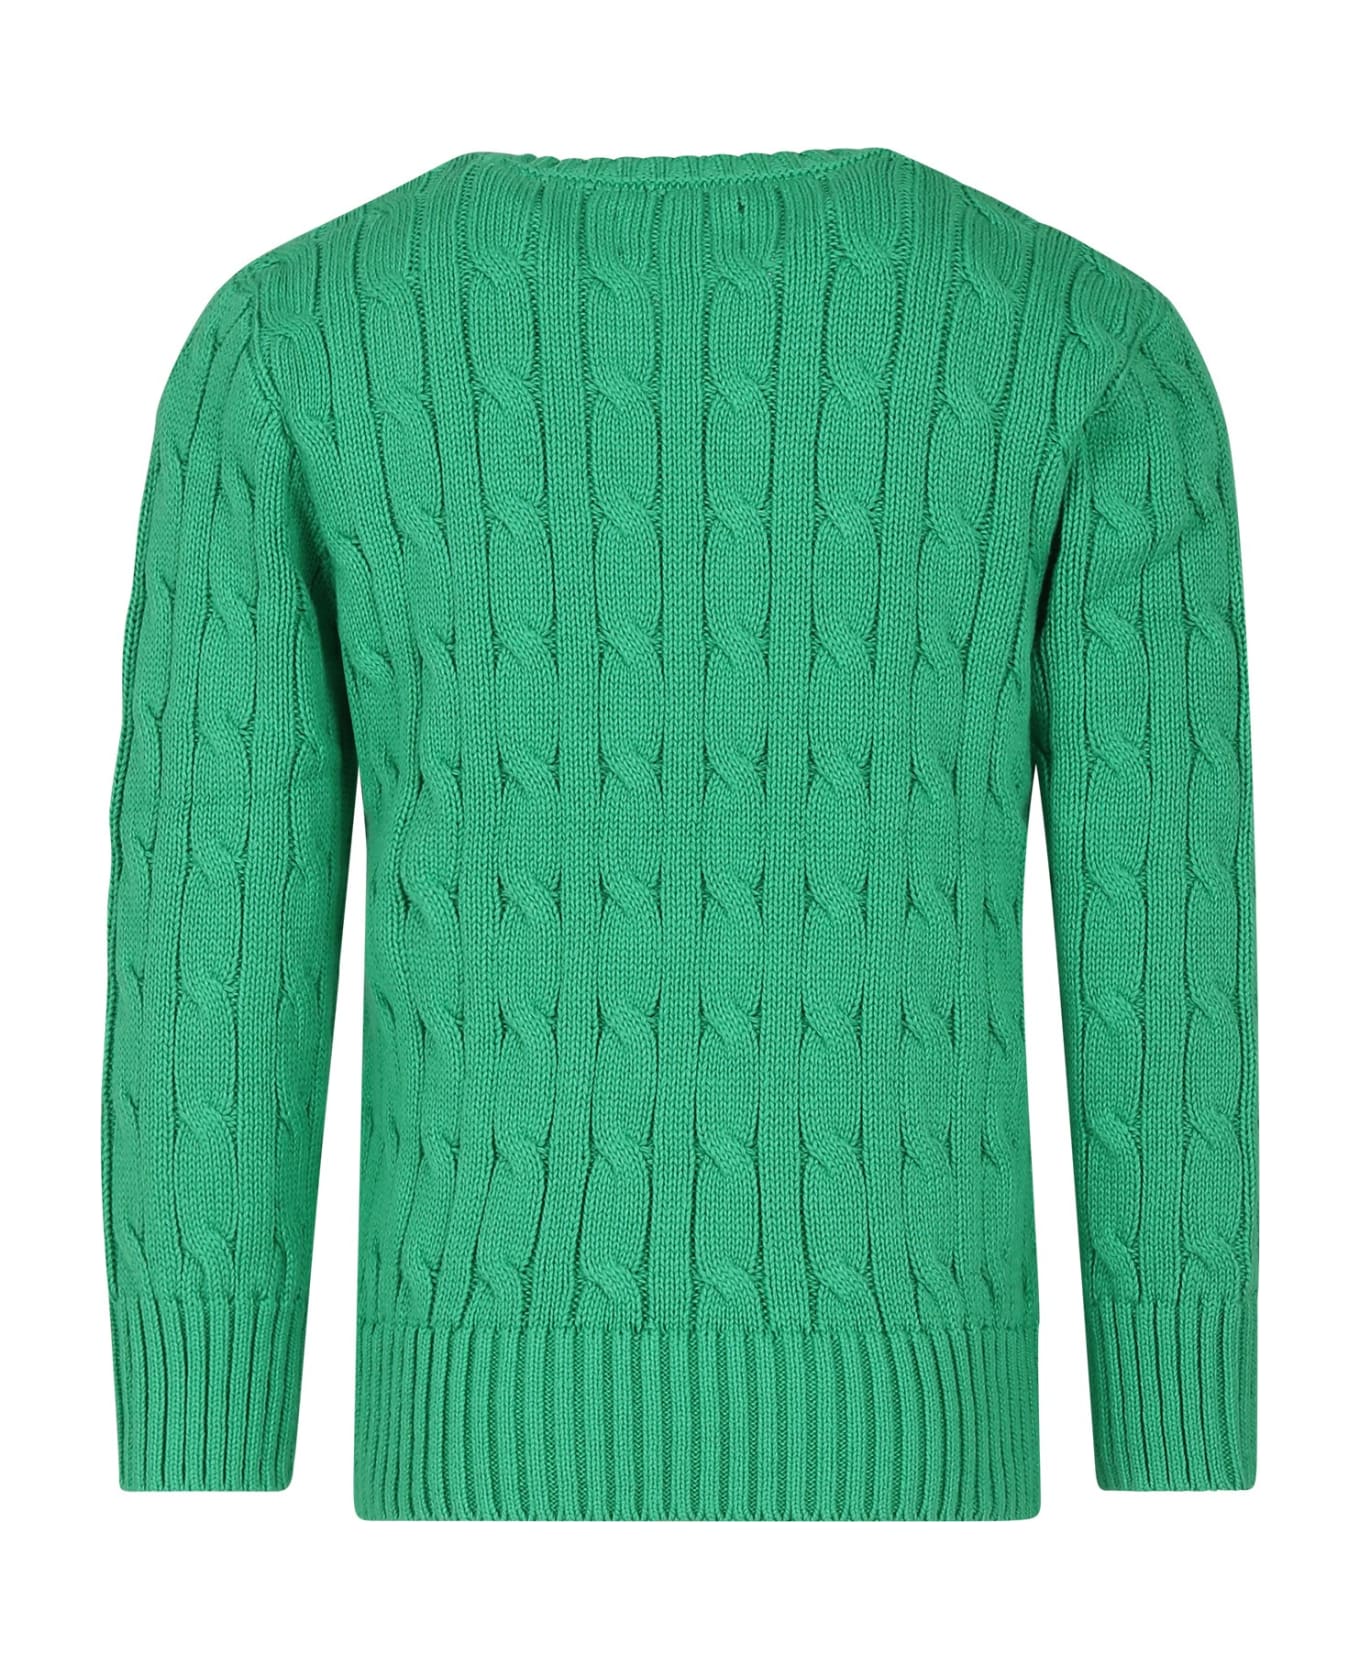 Ralph Lauren Green Sweater For Boy With Embroidery - Green